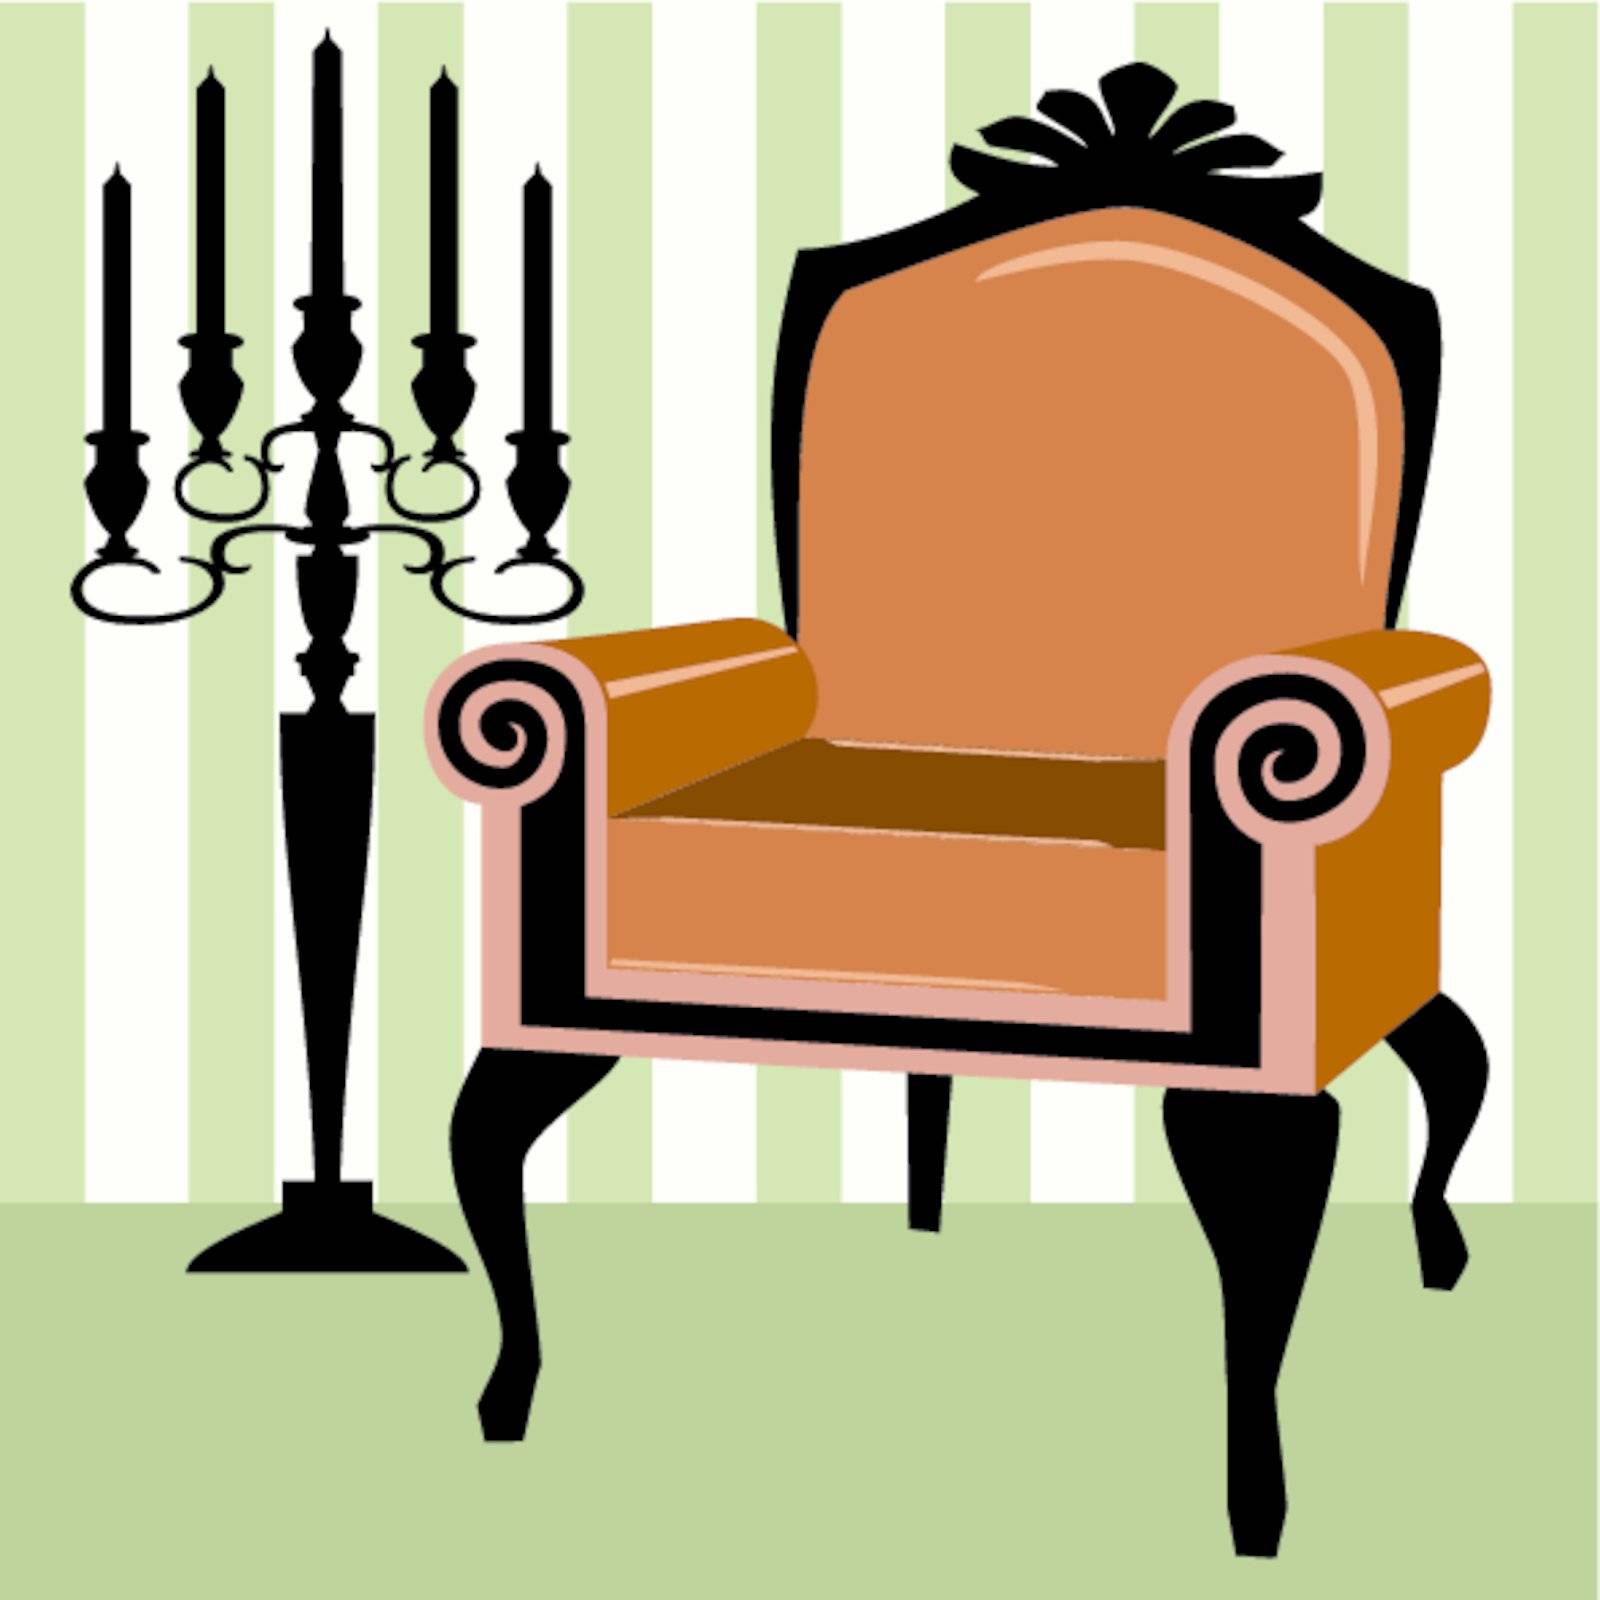 Armchair and candelabra on the wallpaper. Design ideas for home interior, decorating elements.